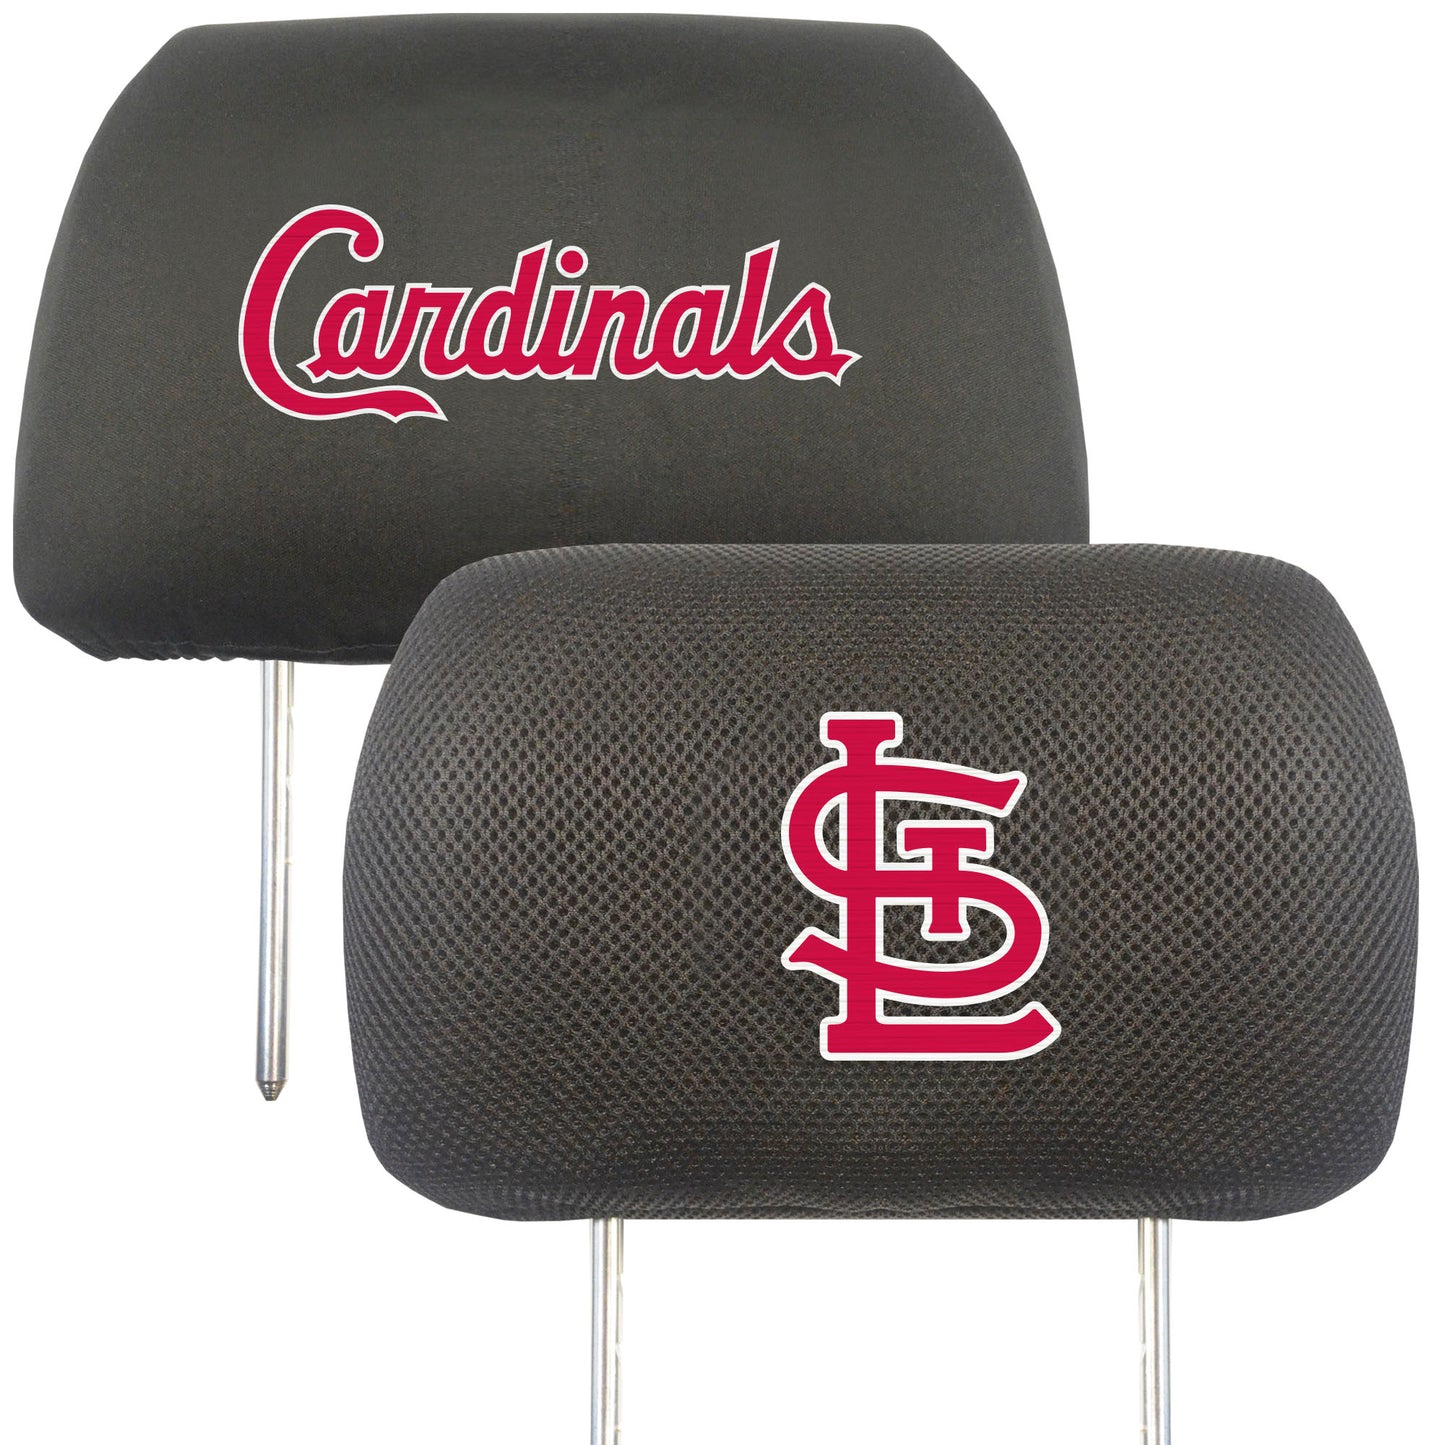 St. Louis Cardinals Embroidered Head Rest Cover Set - 2 Pieces